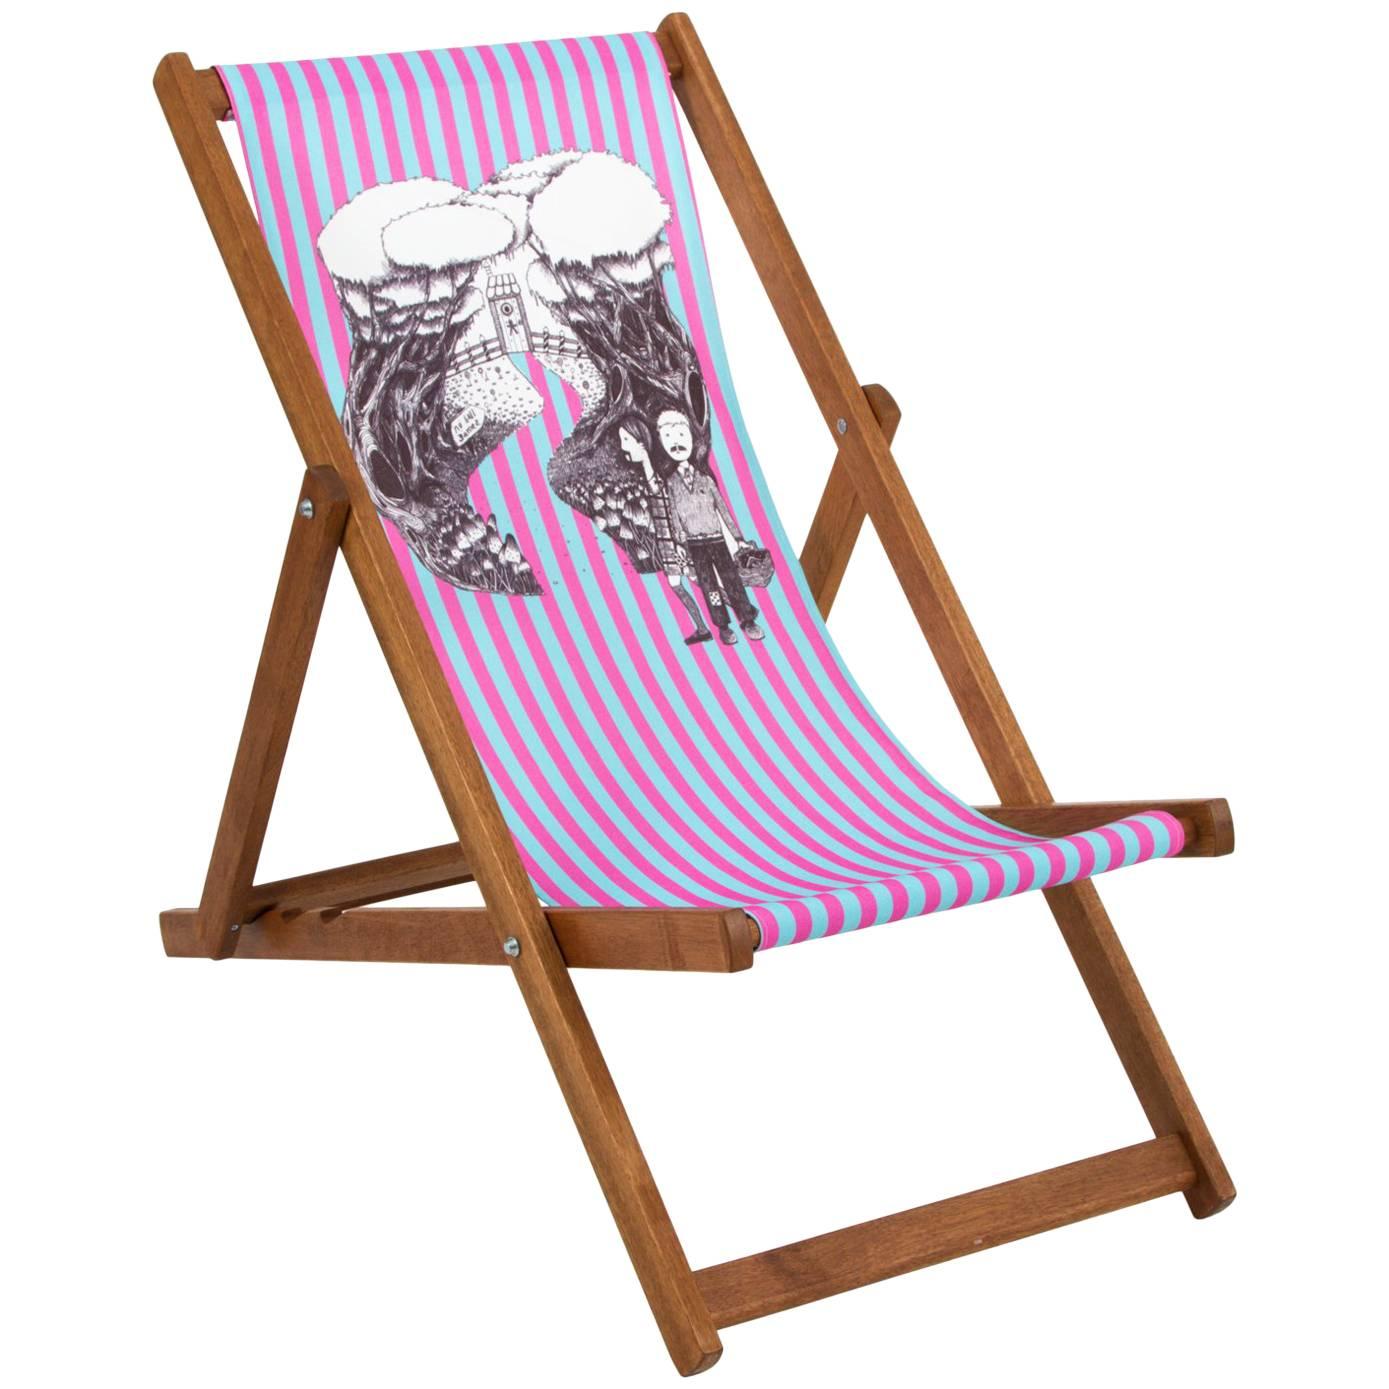 Folding Chair by Designer Alexander McQueen for Royal Parks Foundation